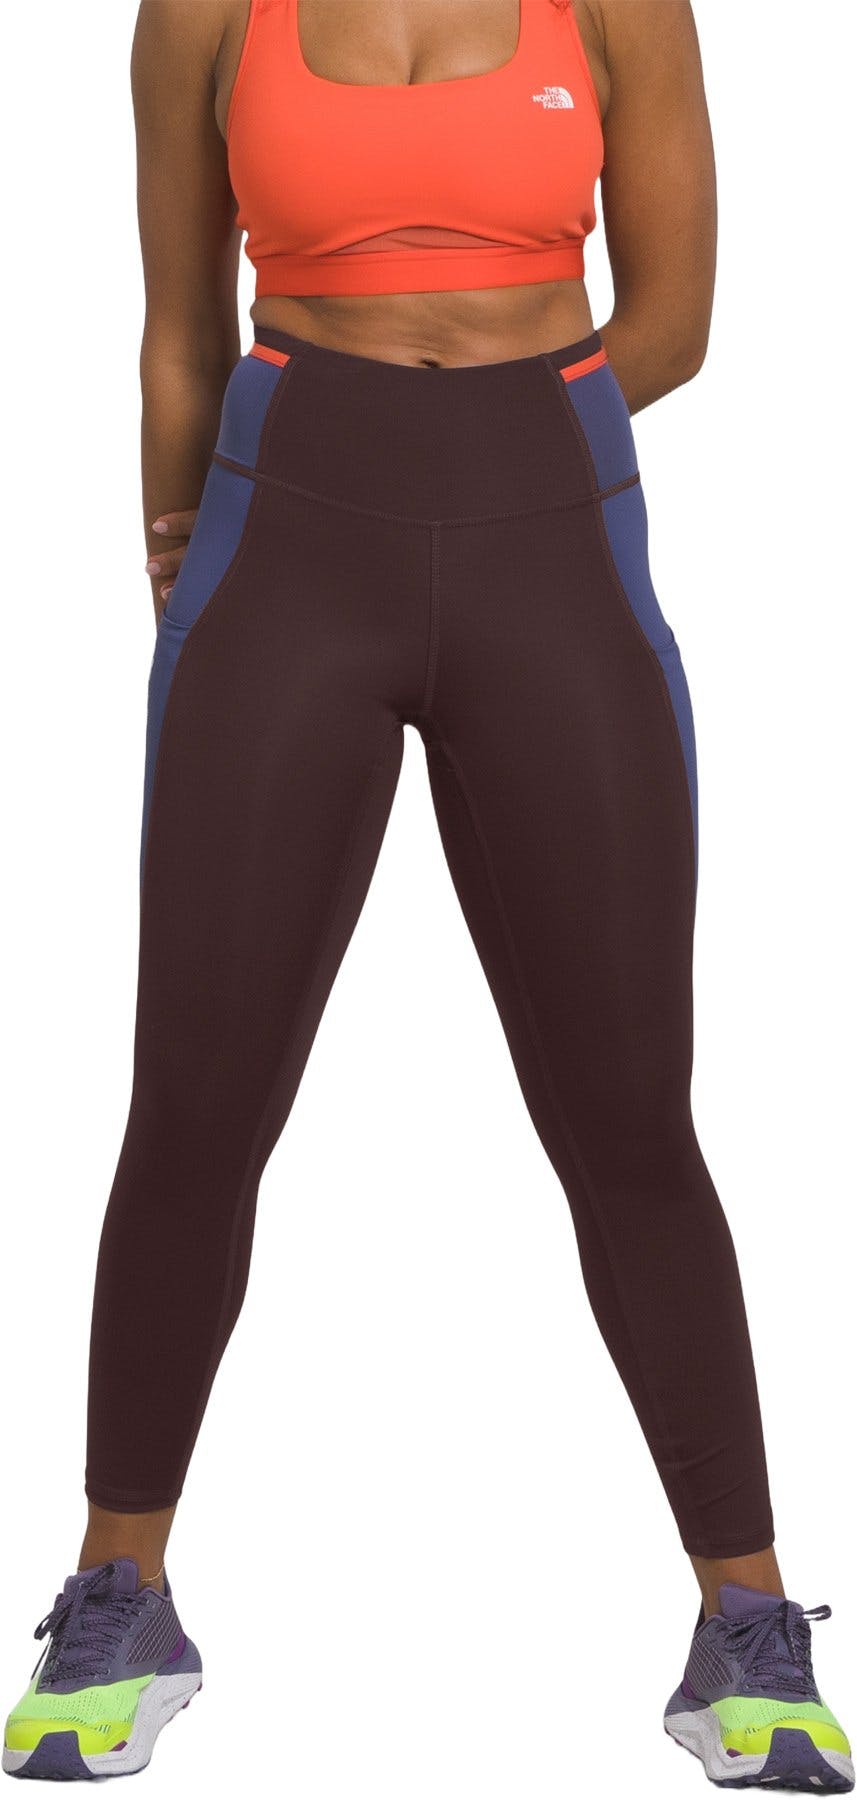 Product image for Trailwear QTM High-Rise 7/8 Tights - Women’s